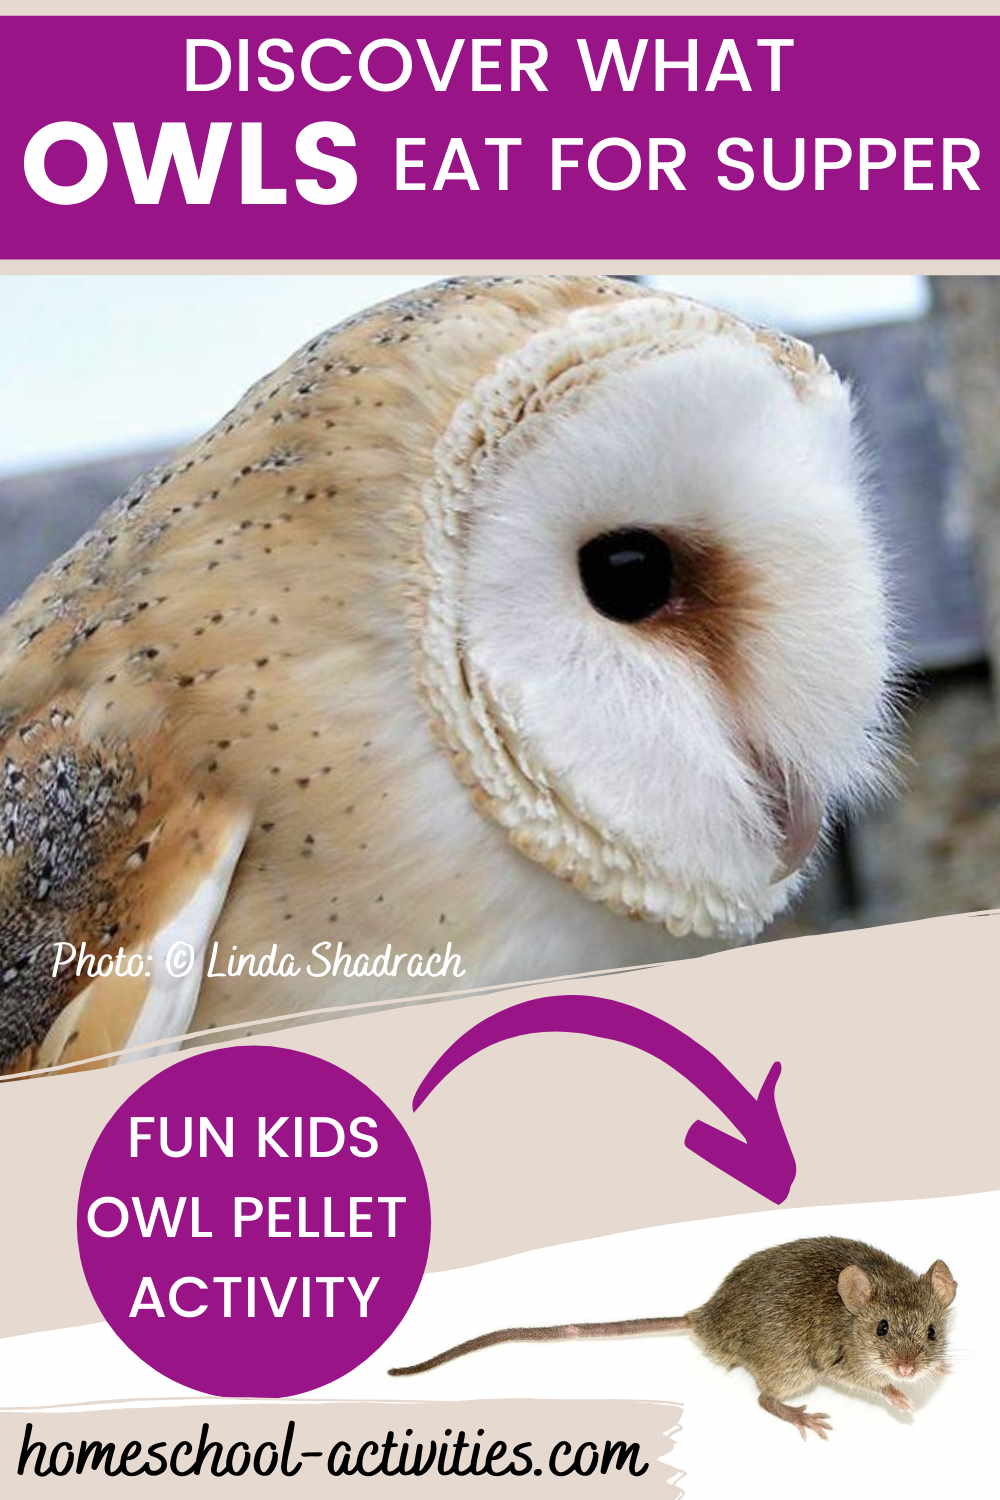 Free Games for Toddlers and Babies: The Owlies